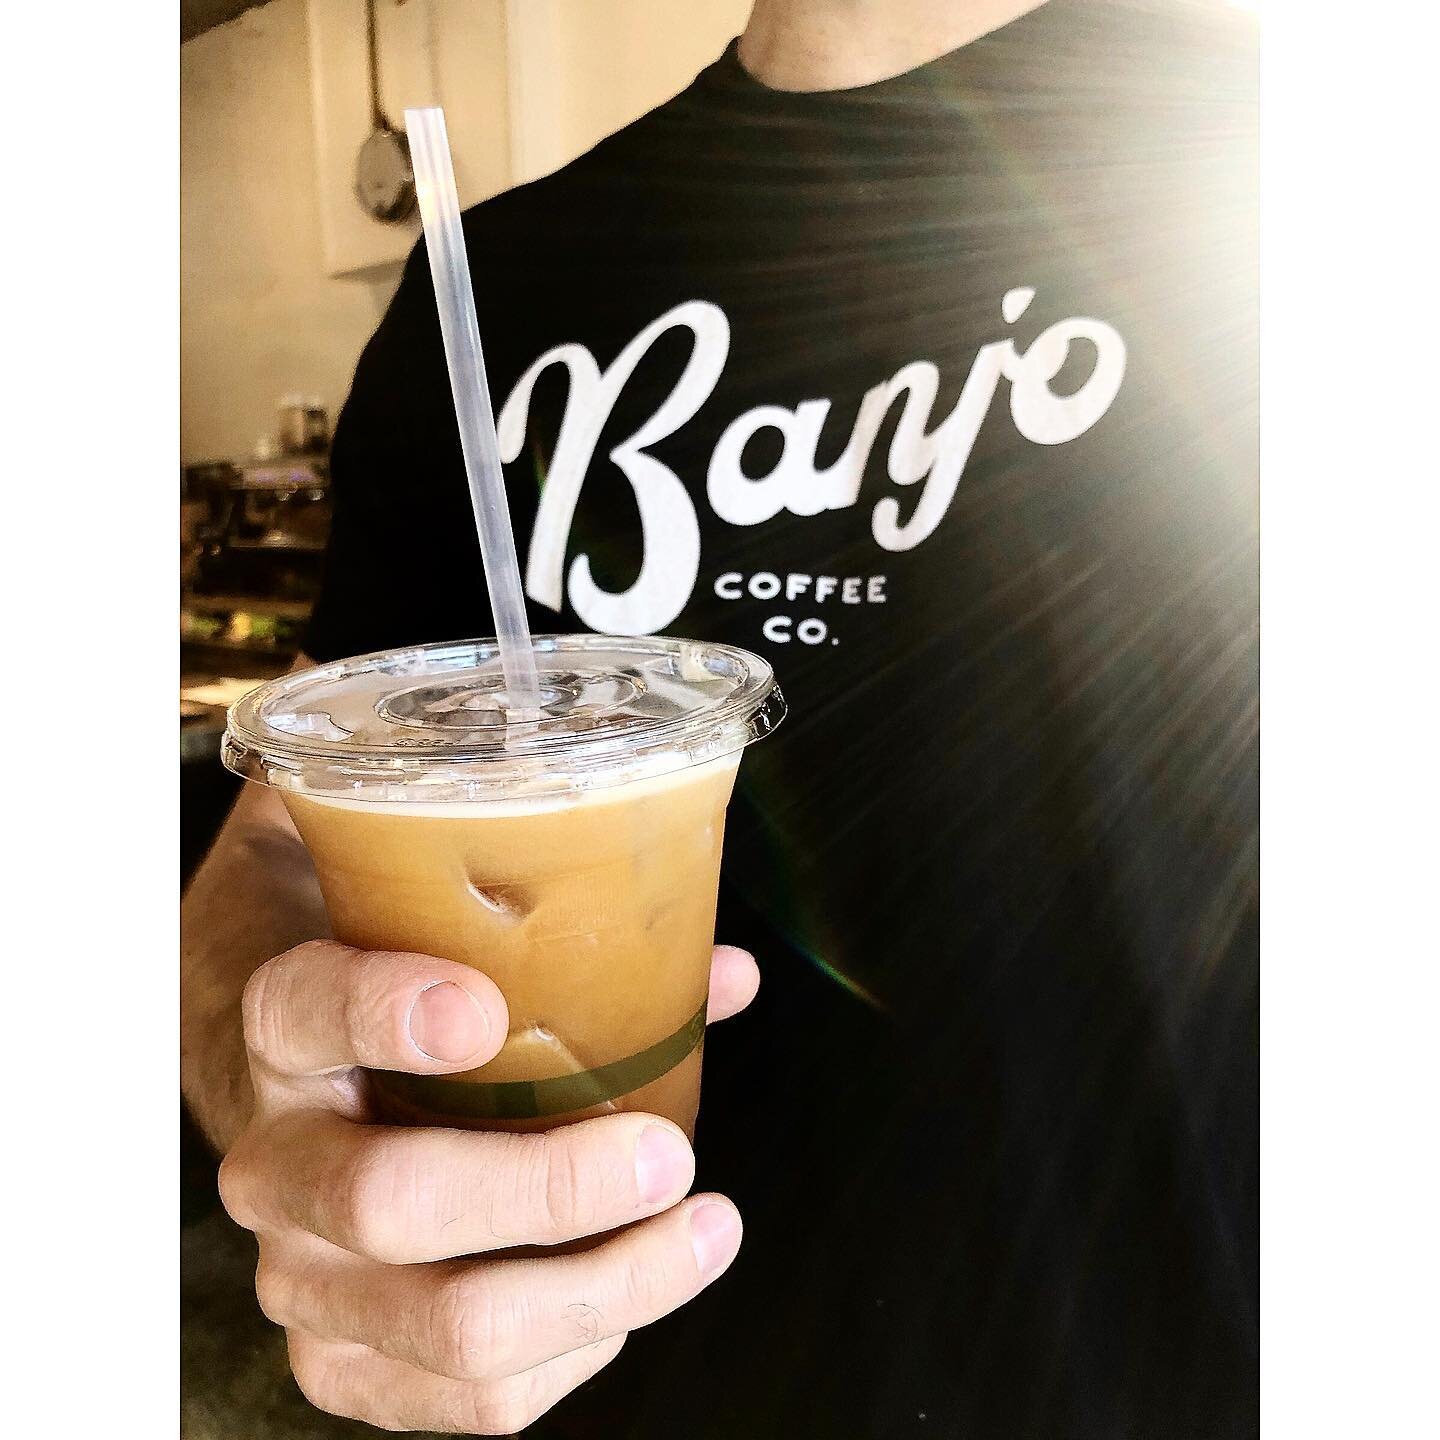 The cafe is open from 7-4pm today! Kick off that summer on nitro.

#nitrocoldbrew #organic #atl #avondaleestates #banjocoffee #summervibes